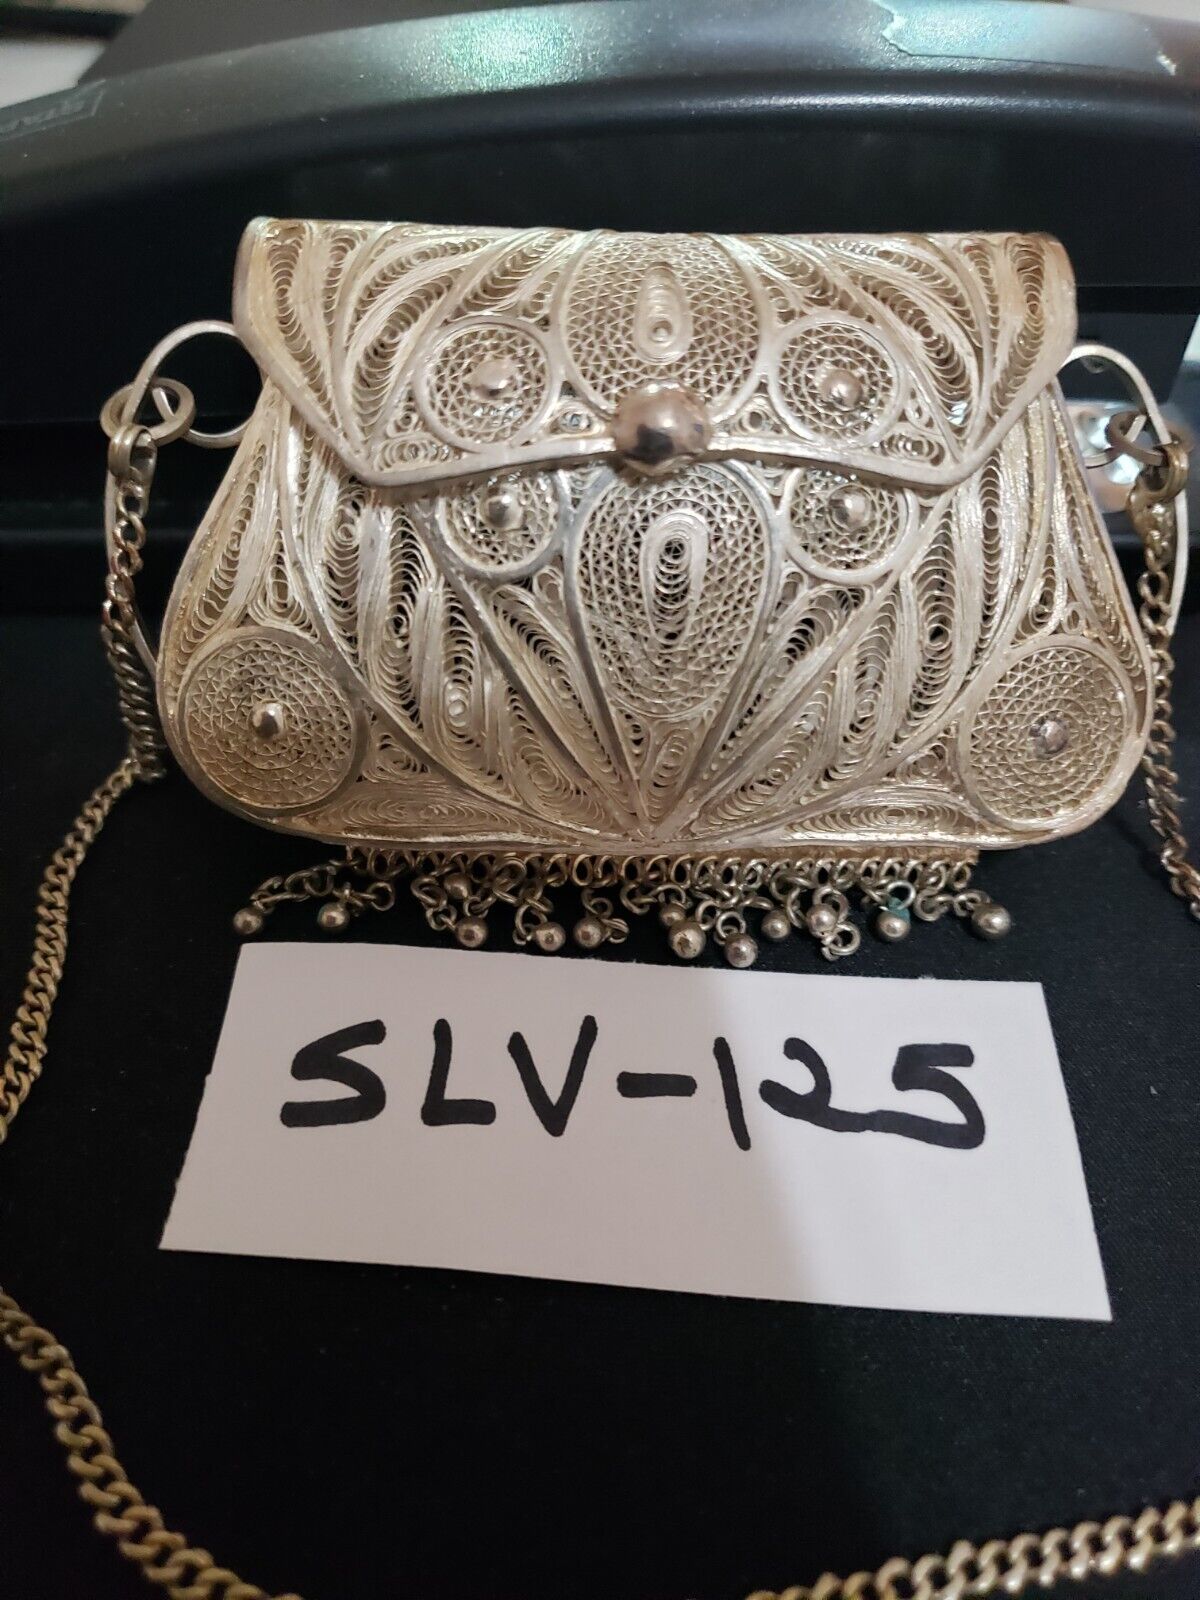 SLV 125 Gorgeous Vintage Sterling Silver HAND MADE KUTCH Small Clutch Bag Purse